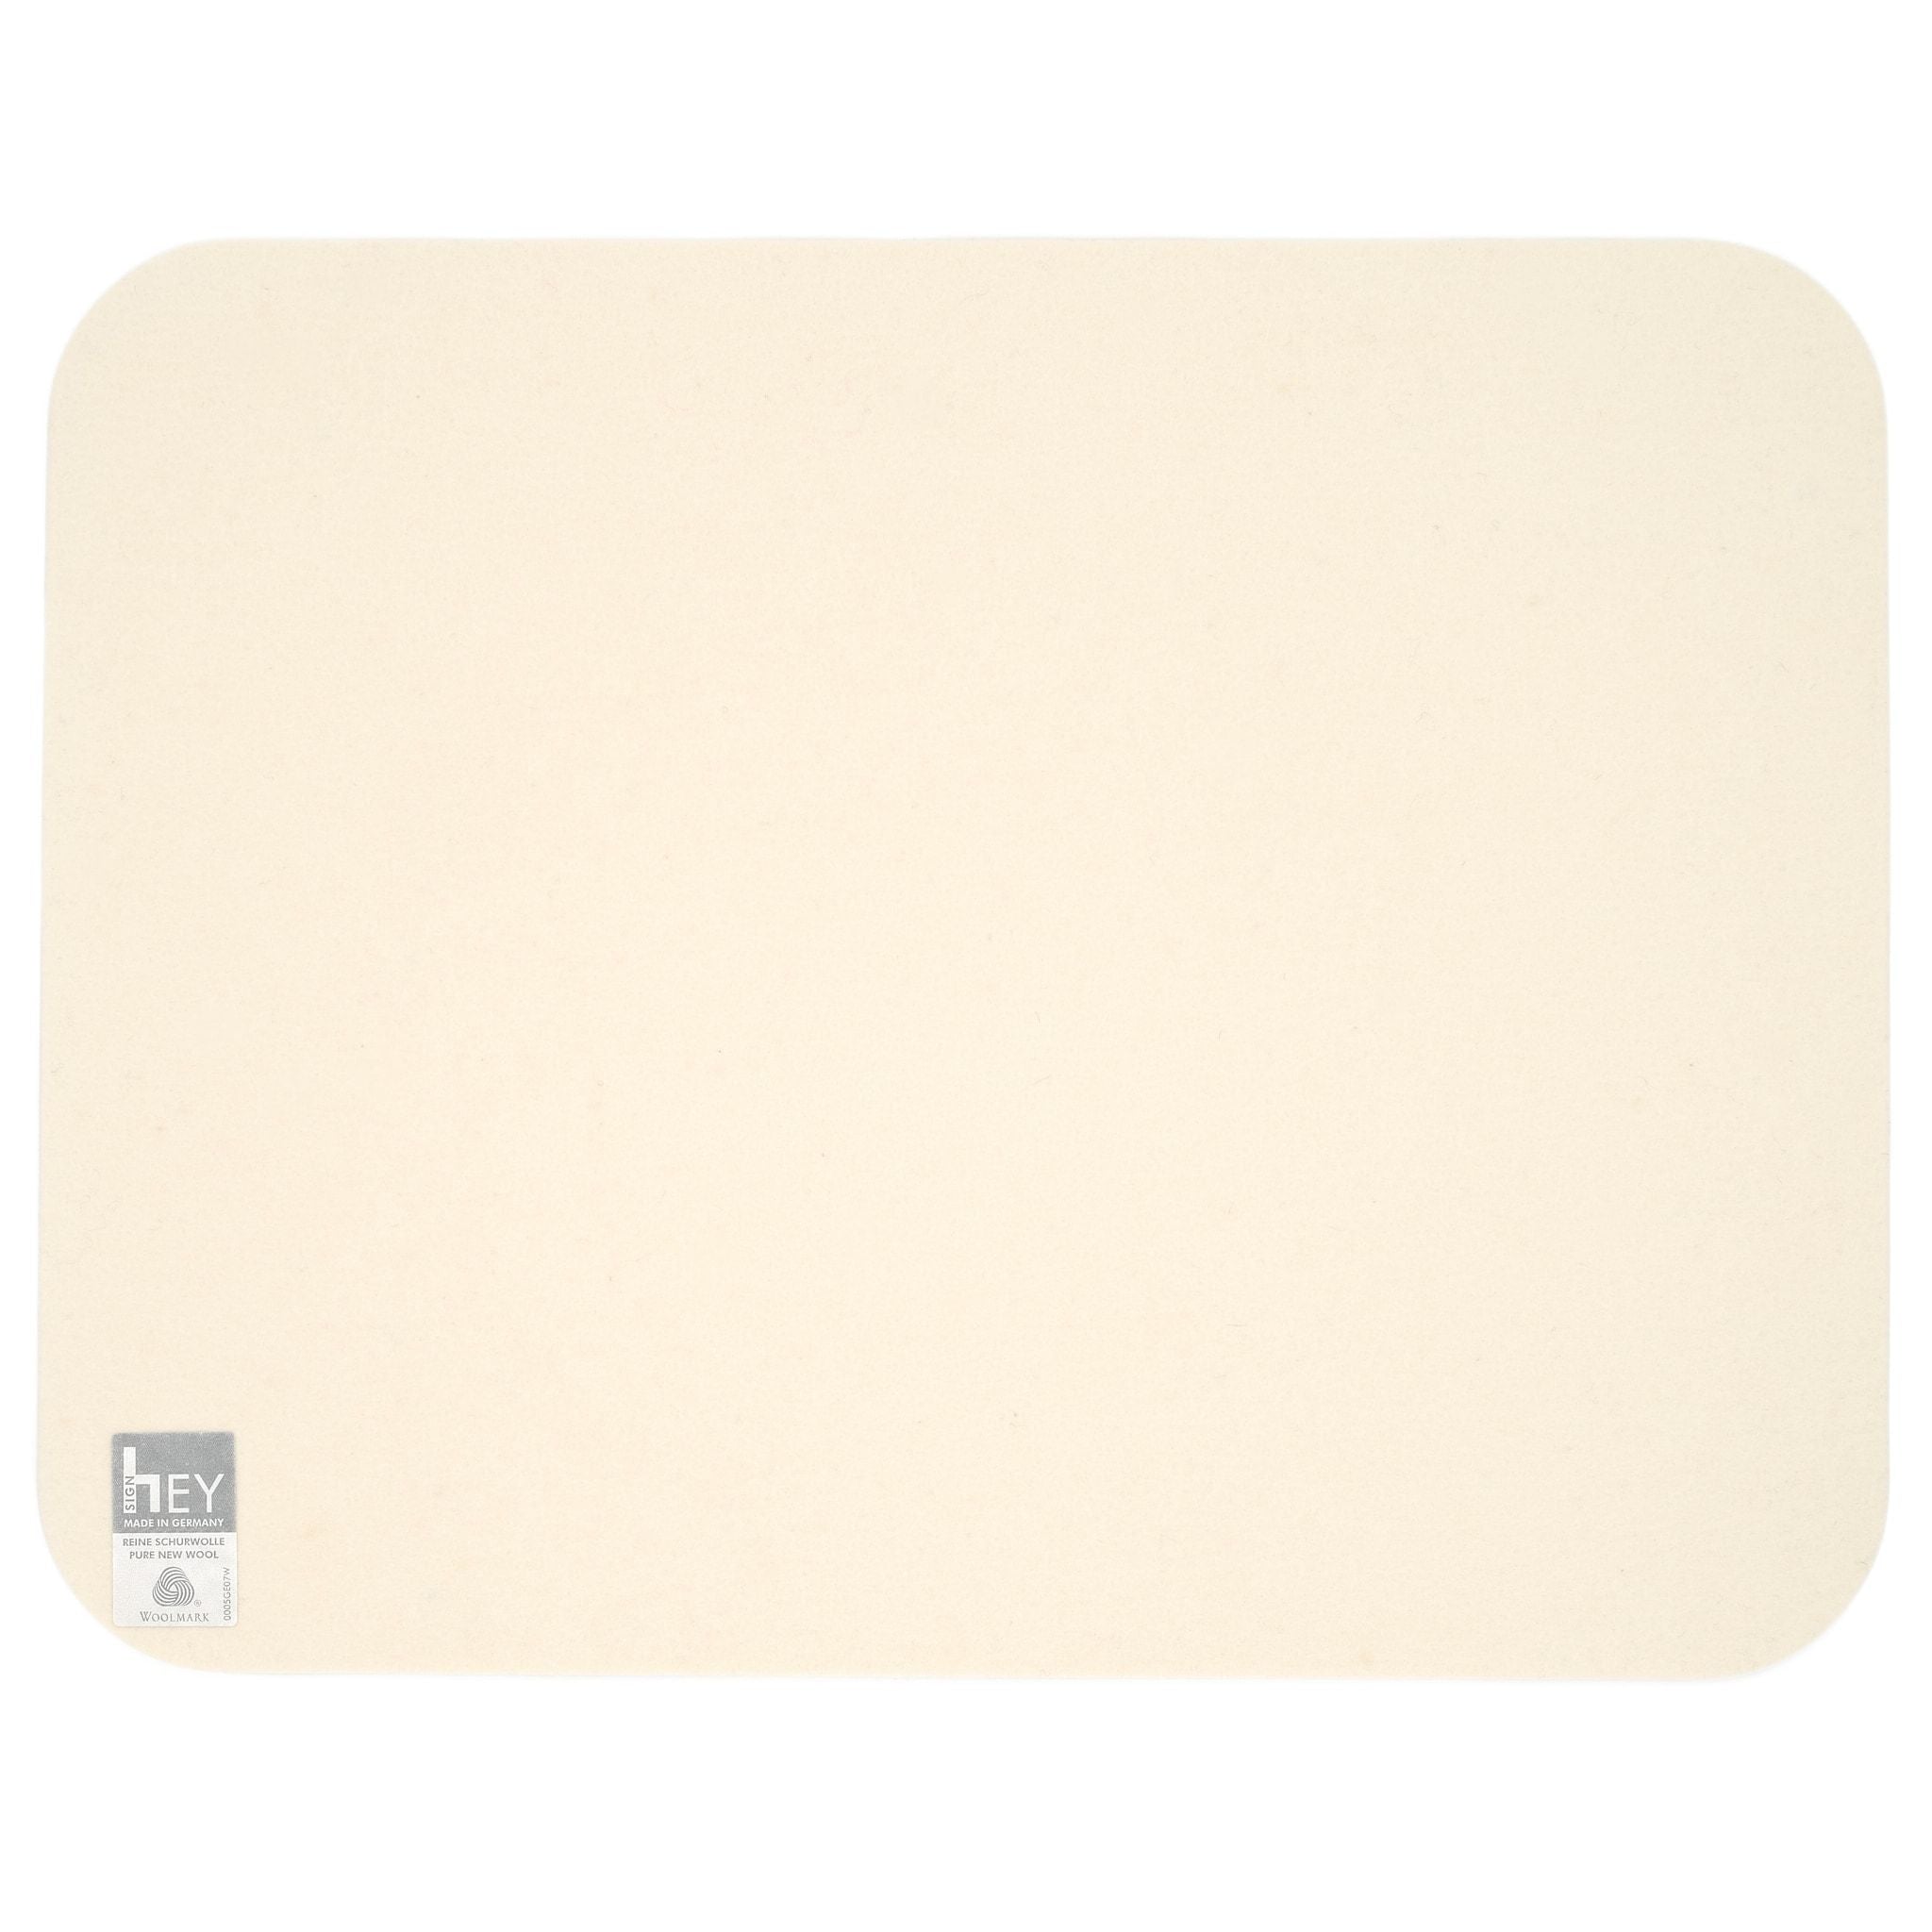 Rectangular Felt Placemat in White by Hey-Sign 300134503 looking at Back